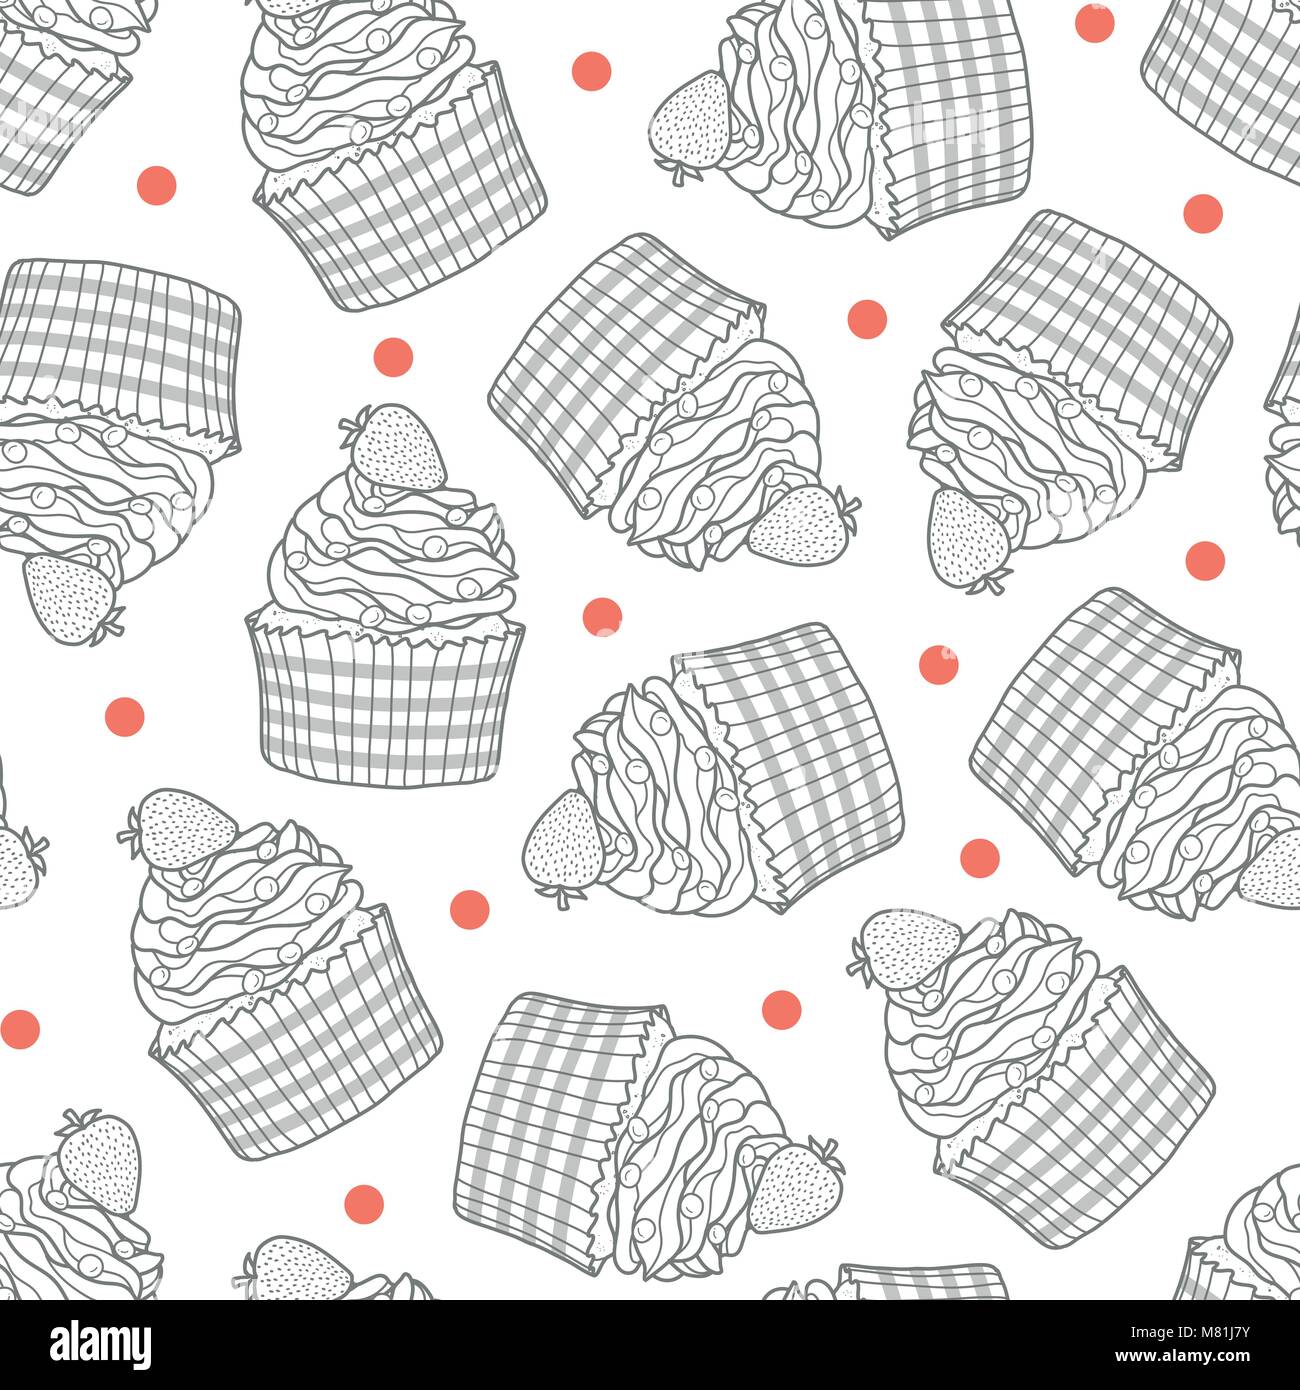 Cupcakes and red dots random on white background. Cute hand drawn seamless pattern of dessert in gray outline style. Stock Vector